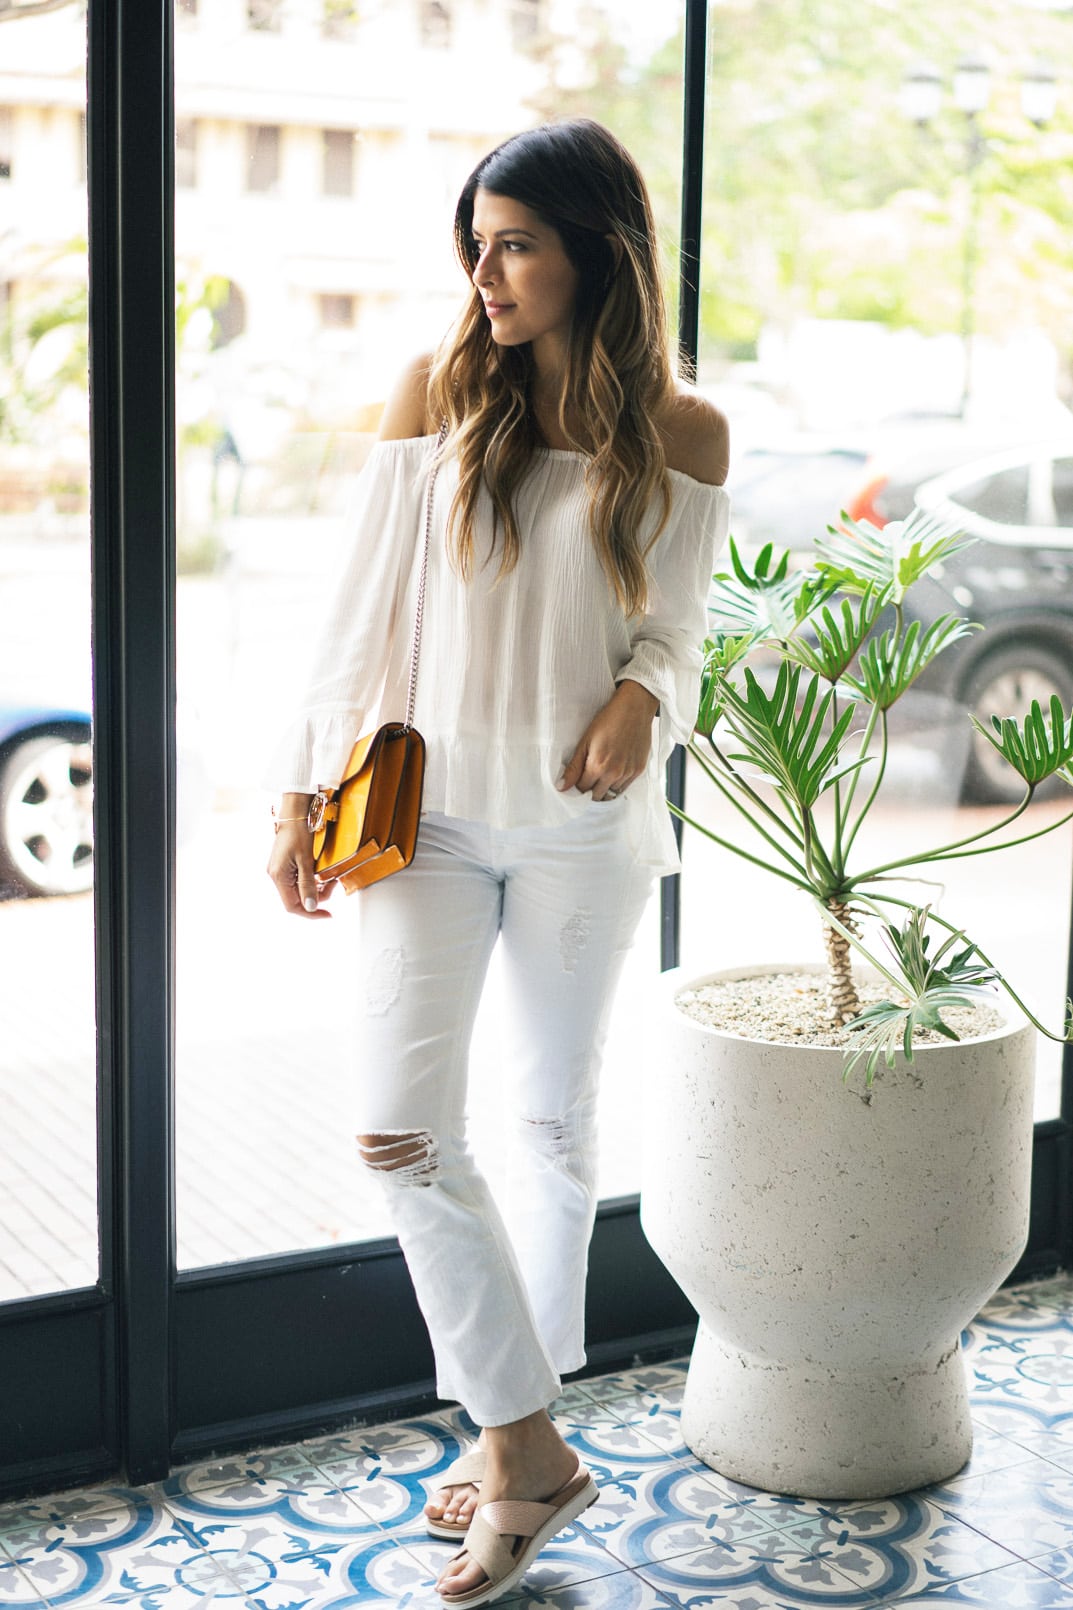 How to dress up sandals - UGG Australia Sandals, 7 FAM White flared cropped jeans, white off the shoulder top